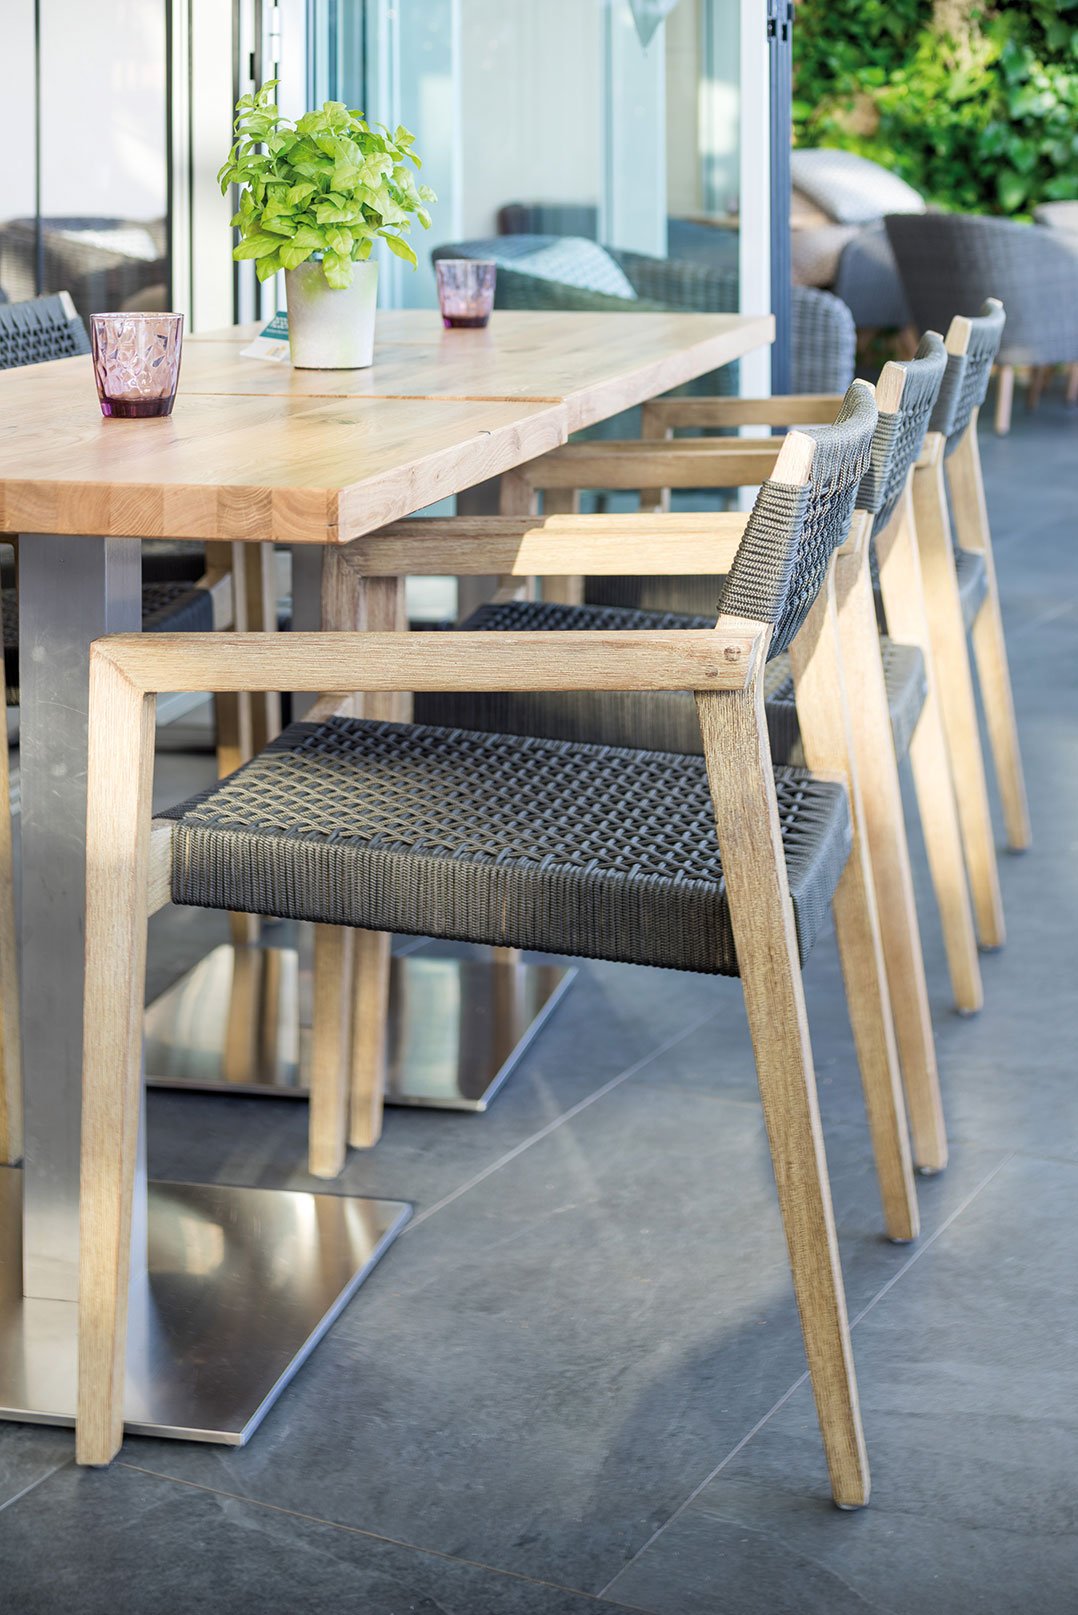 Outdoor Wickerwork chairs for your restaurant or hotel